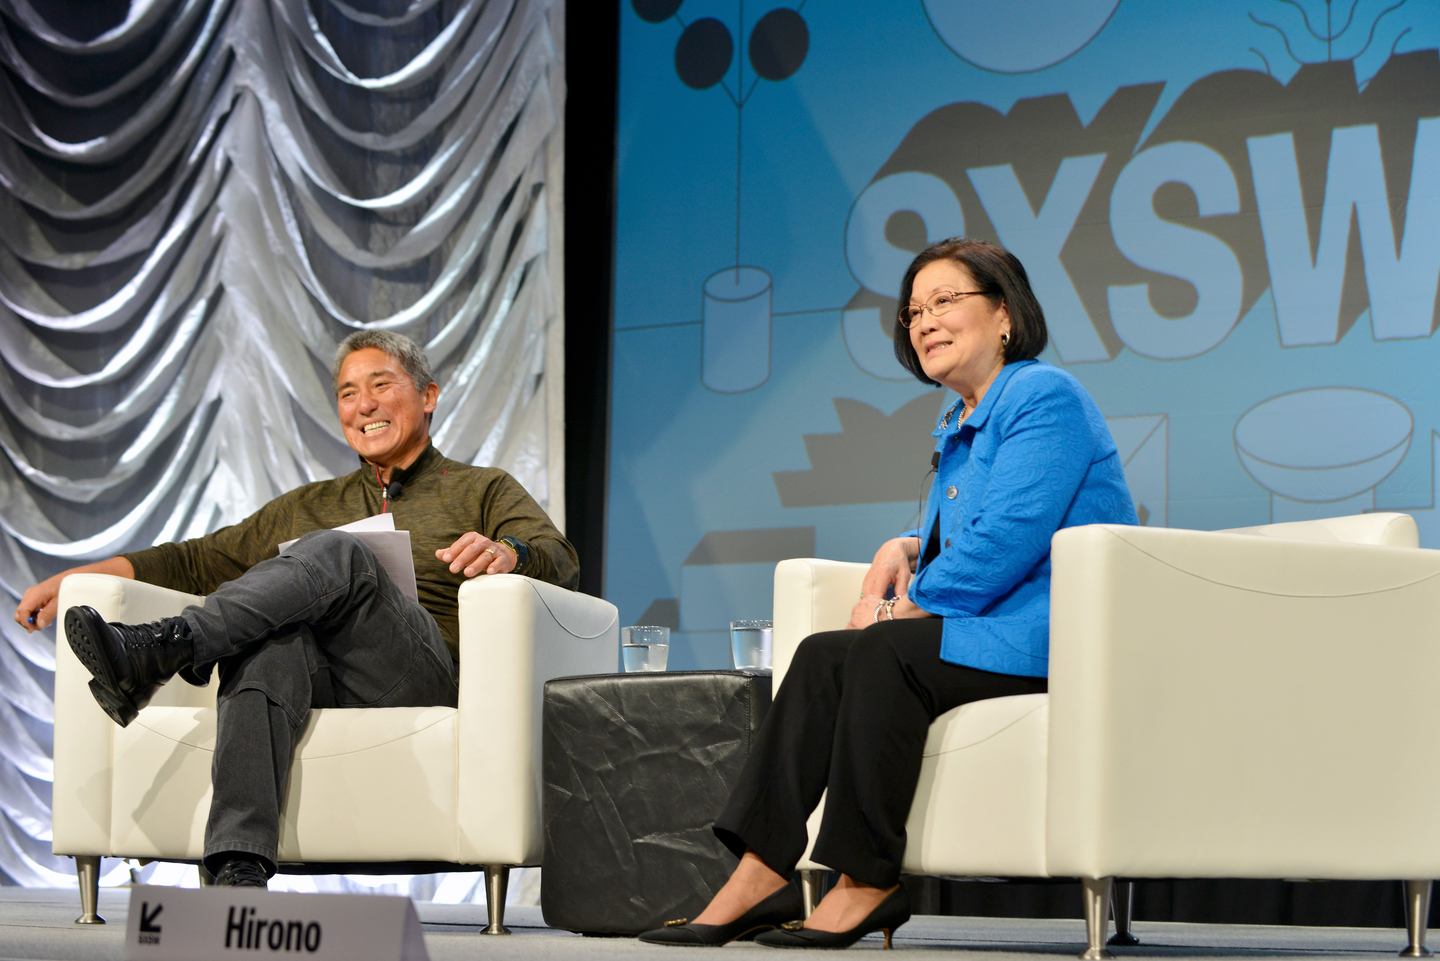 (L-R) Guy Kawasaki and Senator Mazie K. Hirono at their Featured Session - Photo by Nicola Gell/Getty Images for SXSW